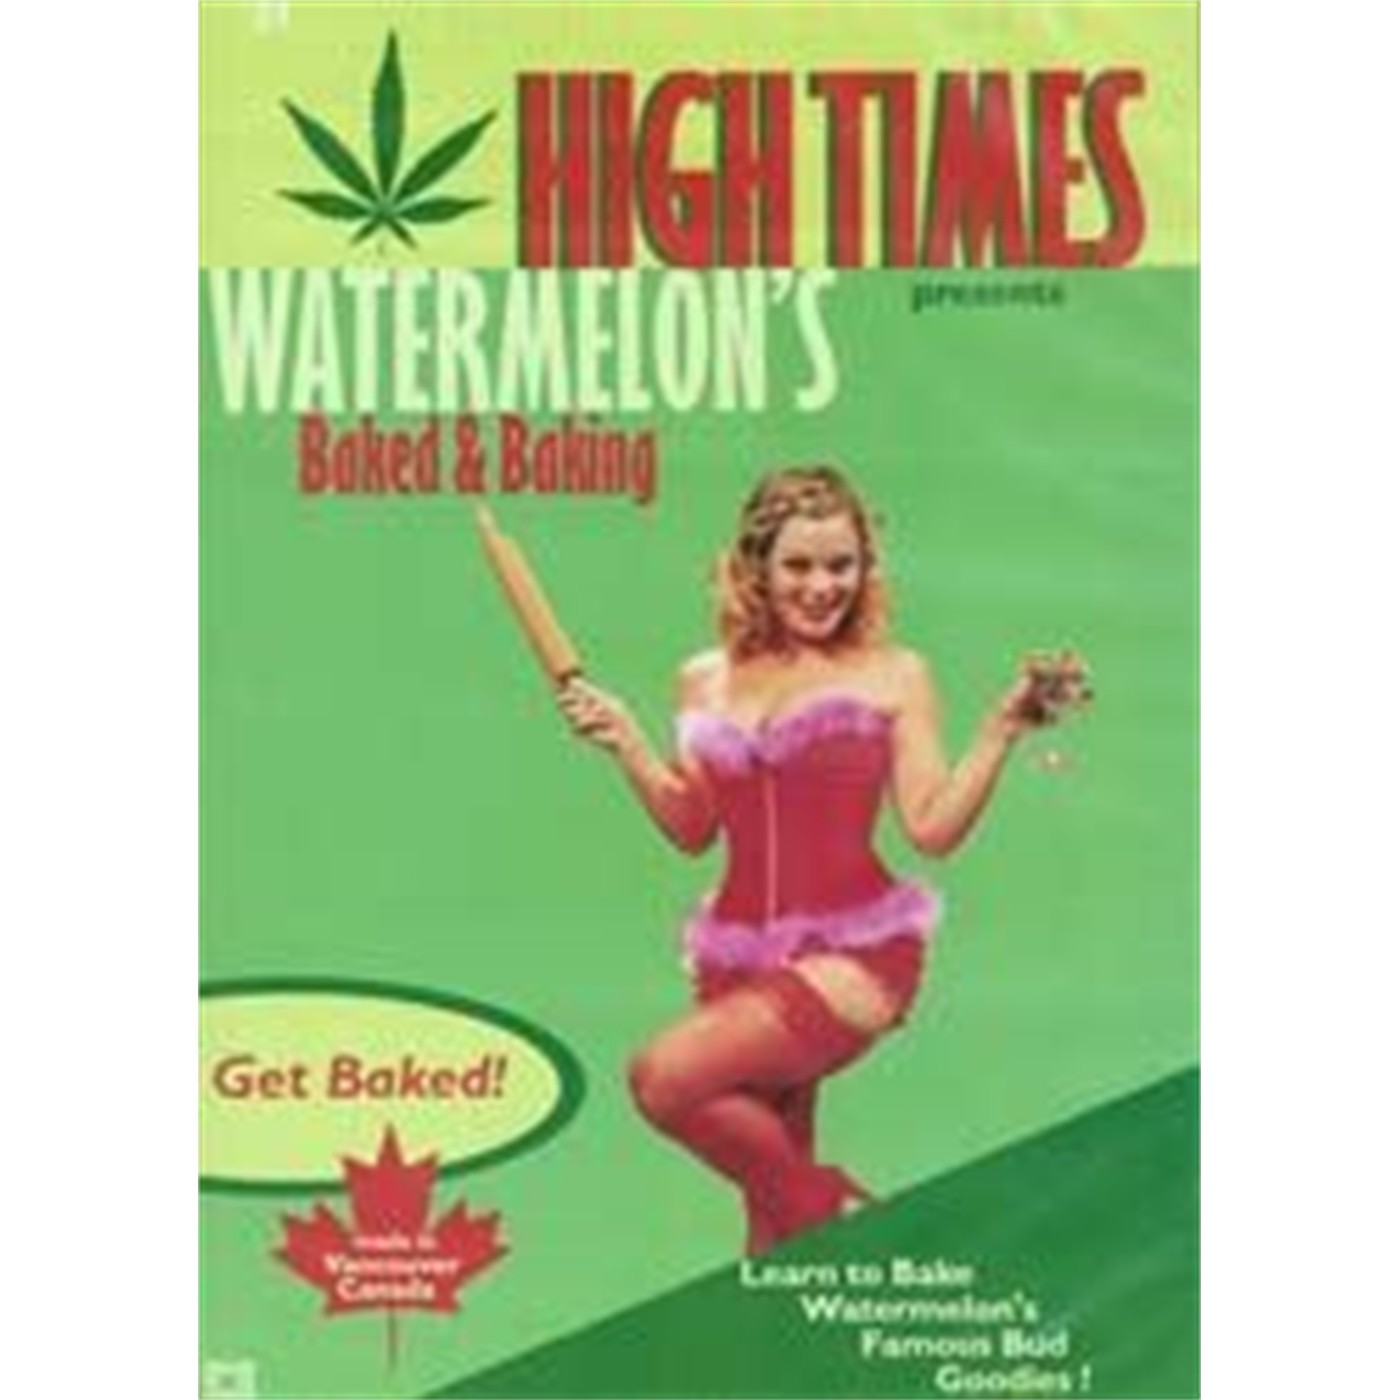 Indie/Cult Films DVD: High Times Presents - Watermelon'